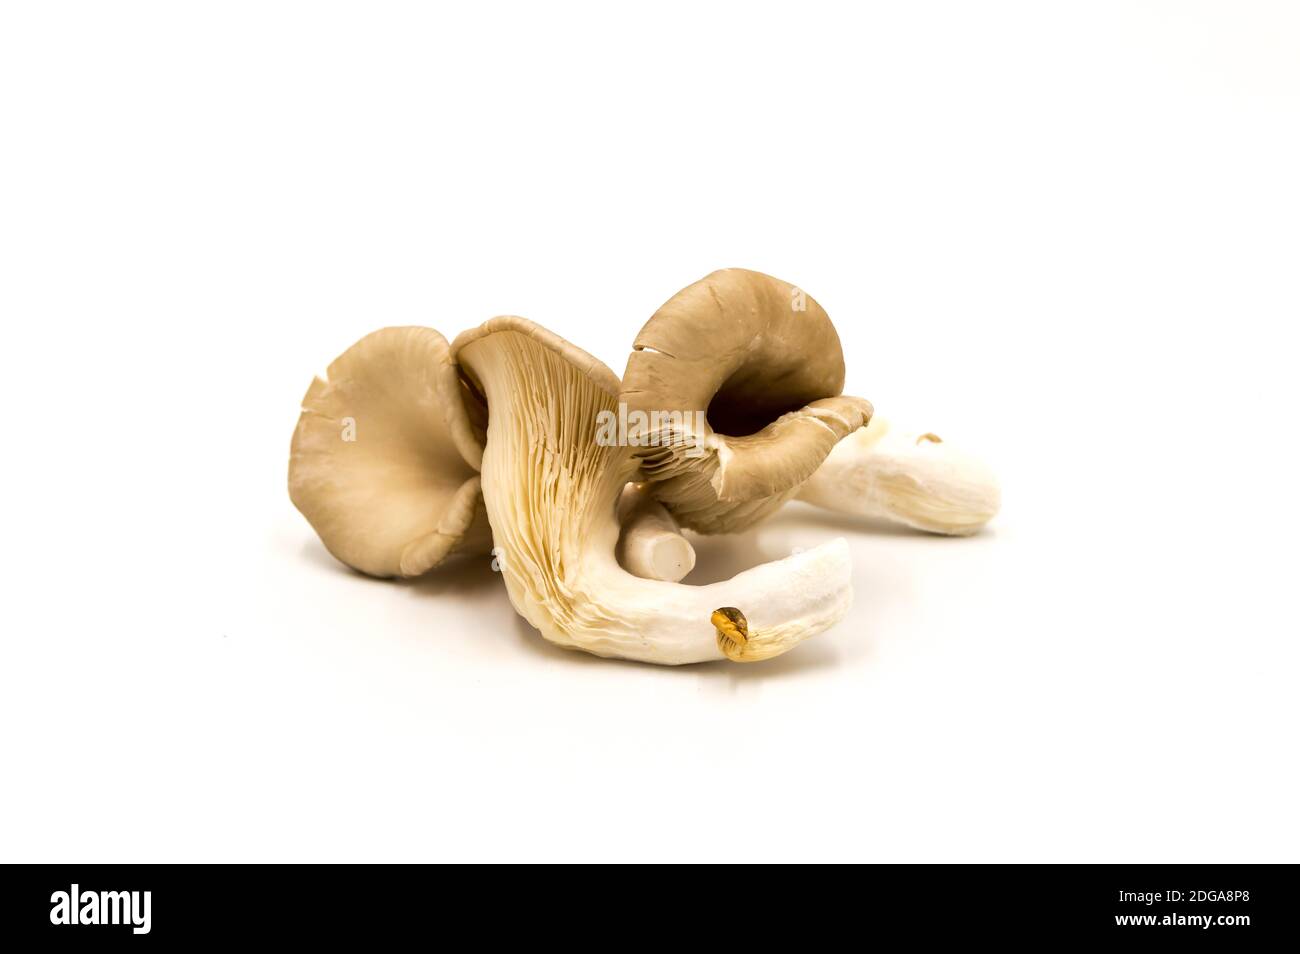 Fresh king oyster mushrooms for cooking vegetarian foods with a high amount of protein. Stock Photo